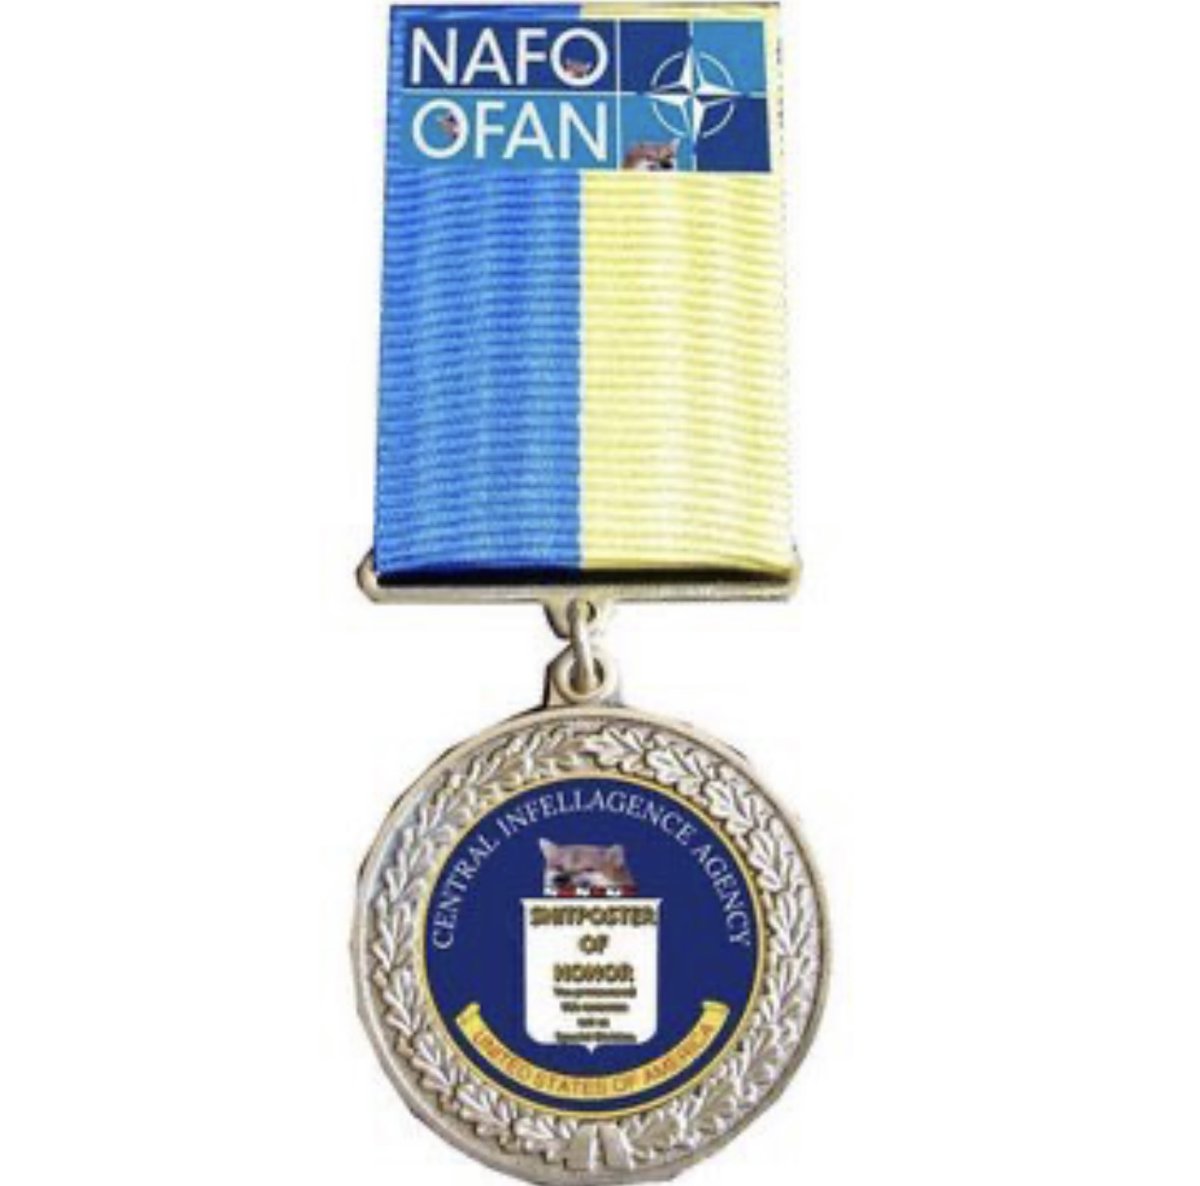 Wearing it with proud thank you #NAFO